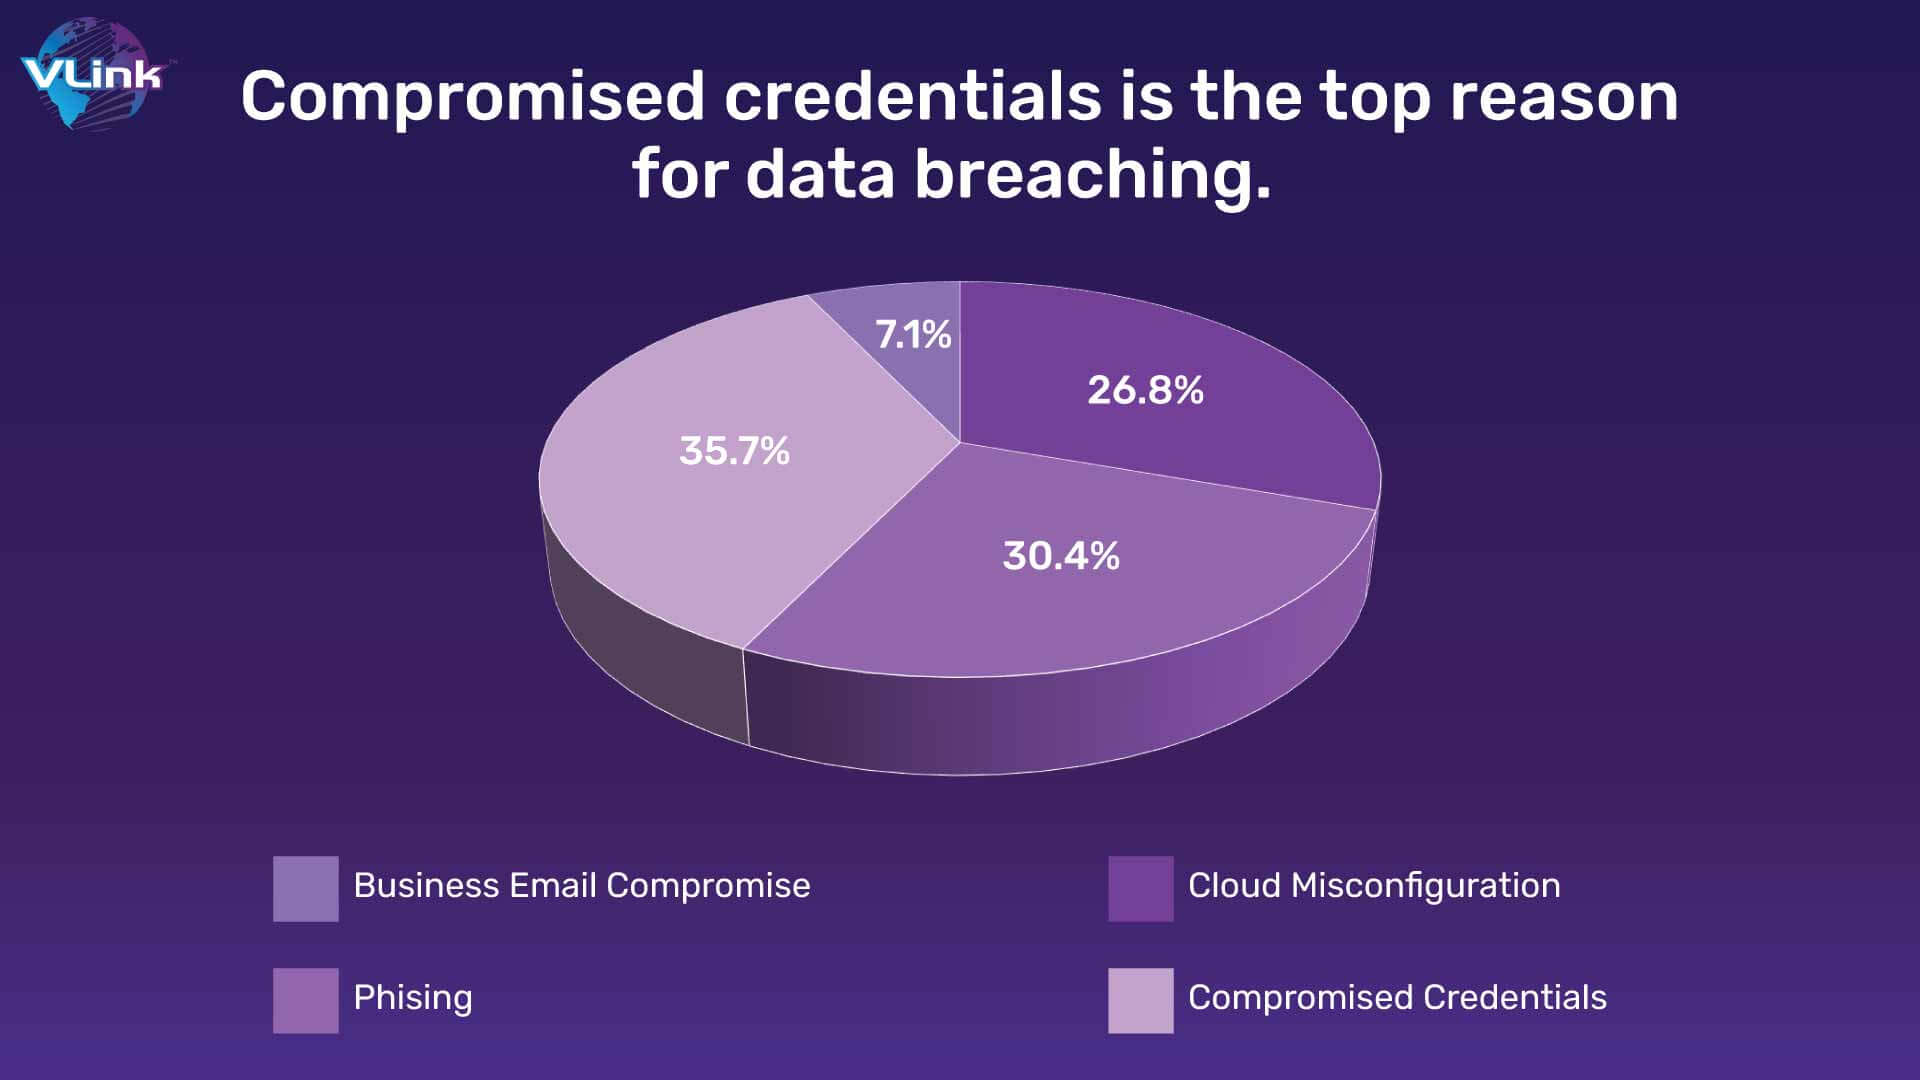 Compromised credentials is the top reason for data breaching